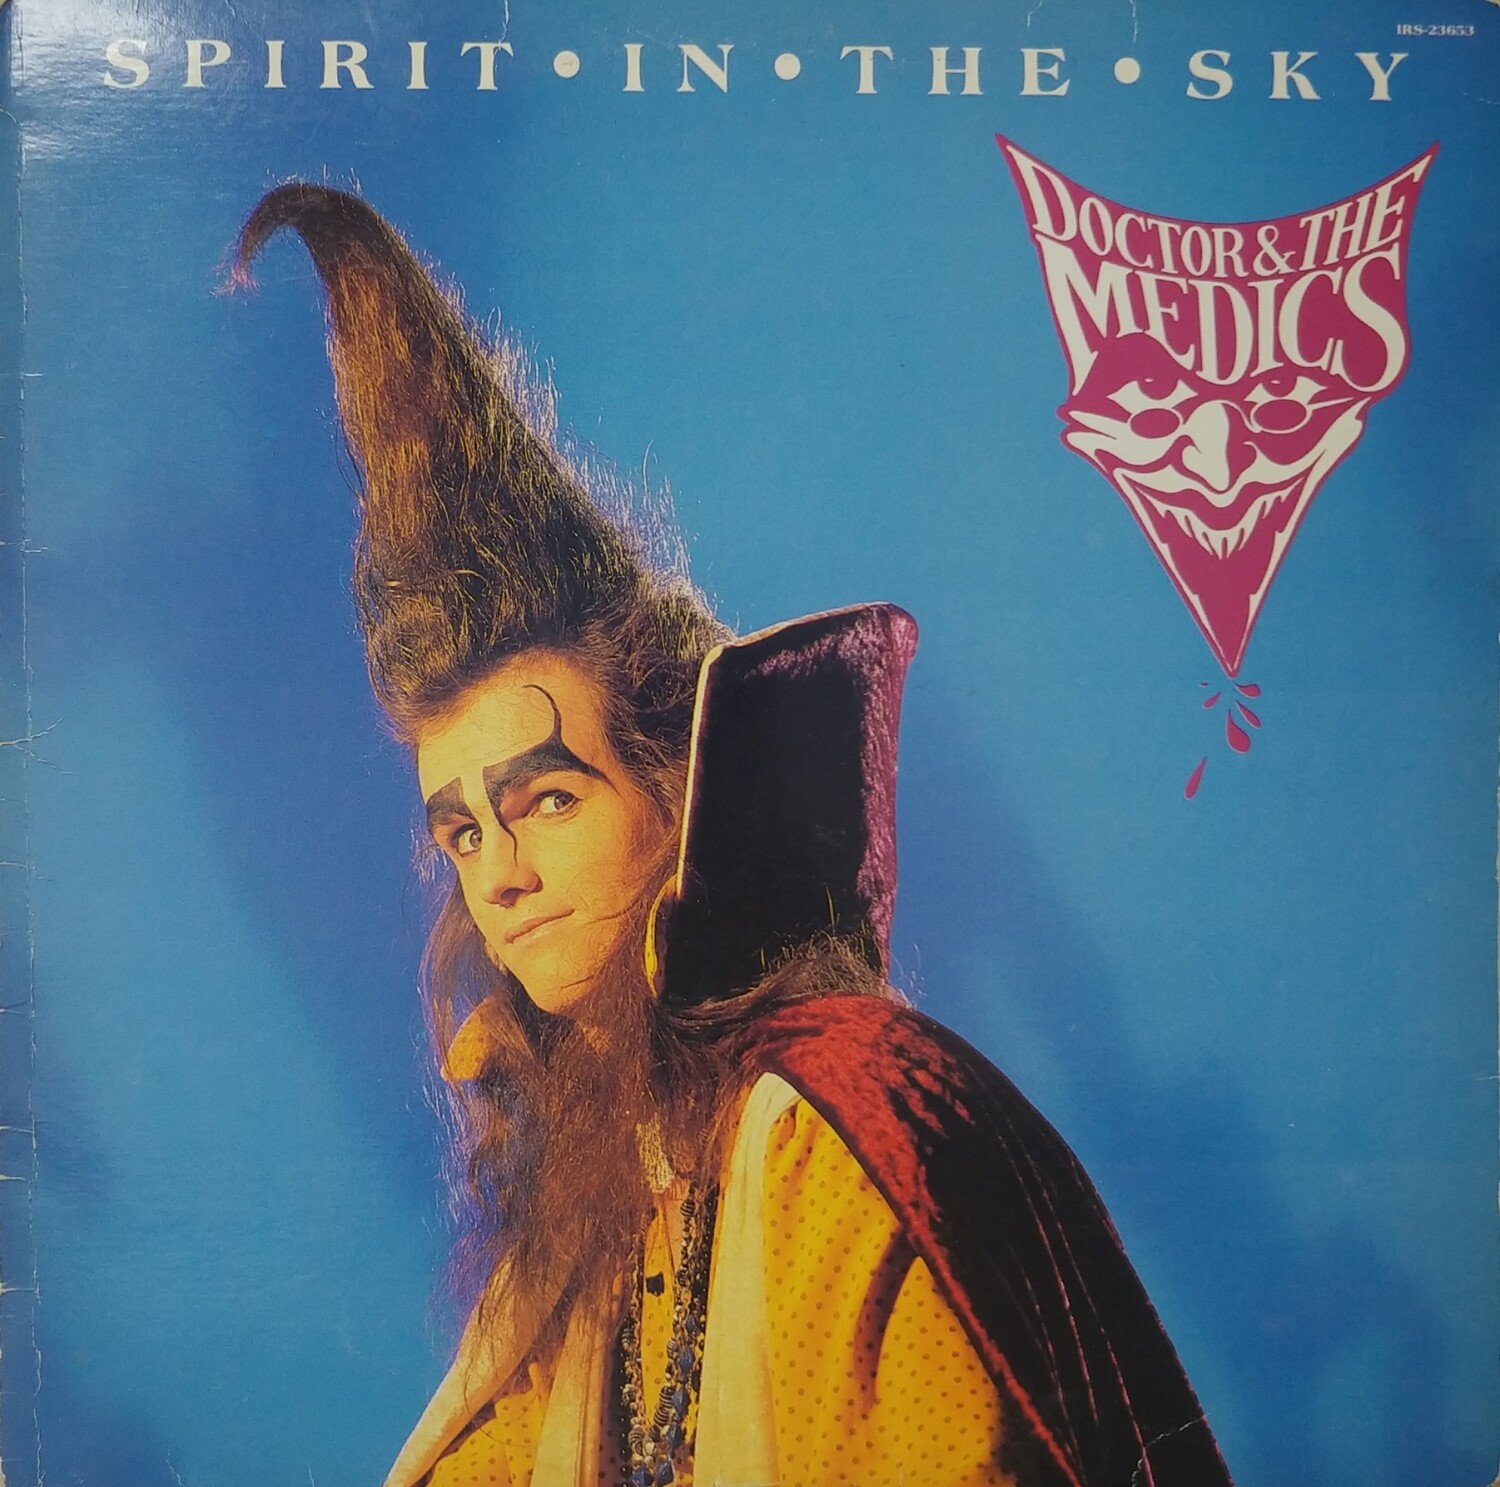 Doctor and The Medics - Spirit in the Sky